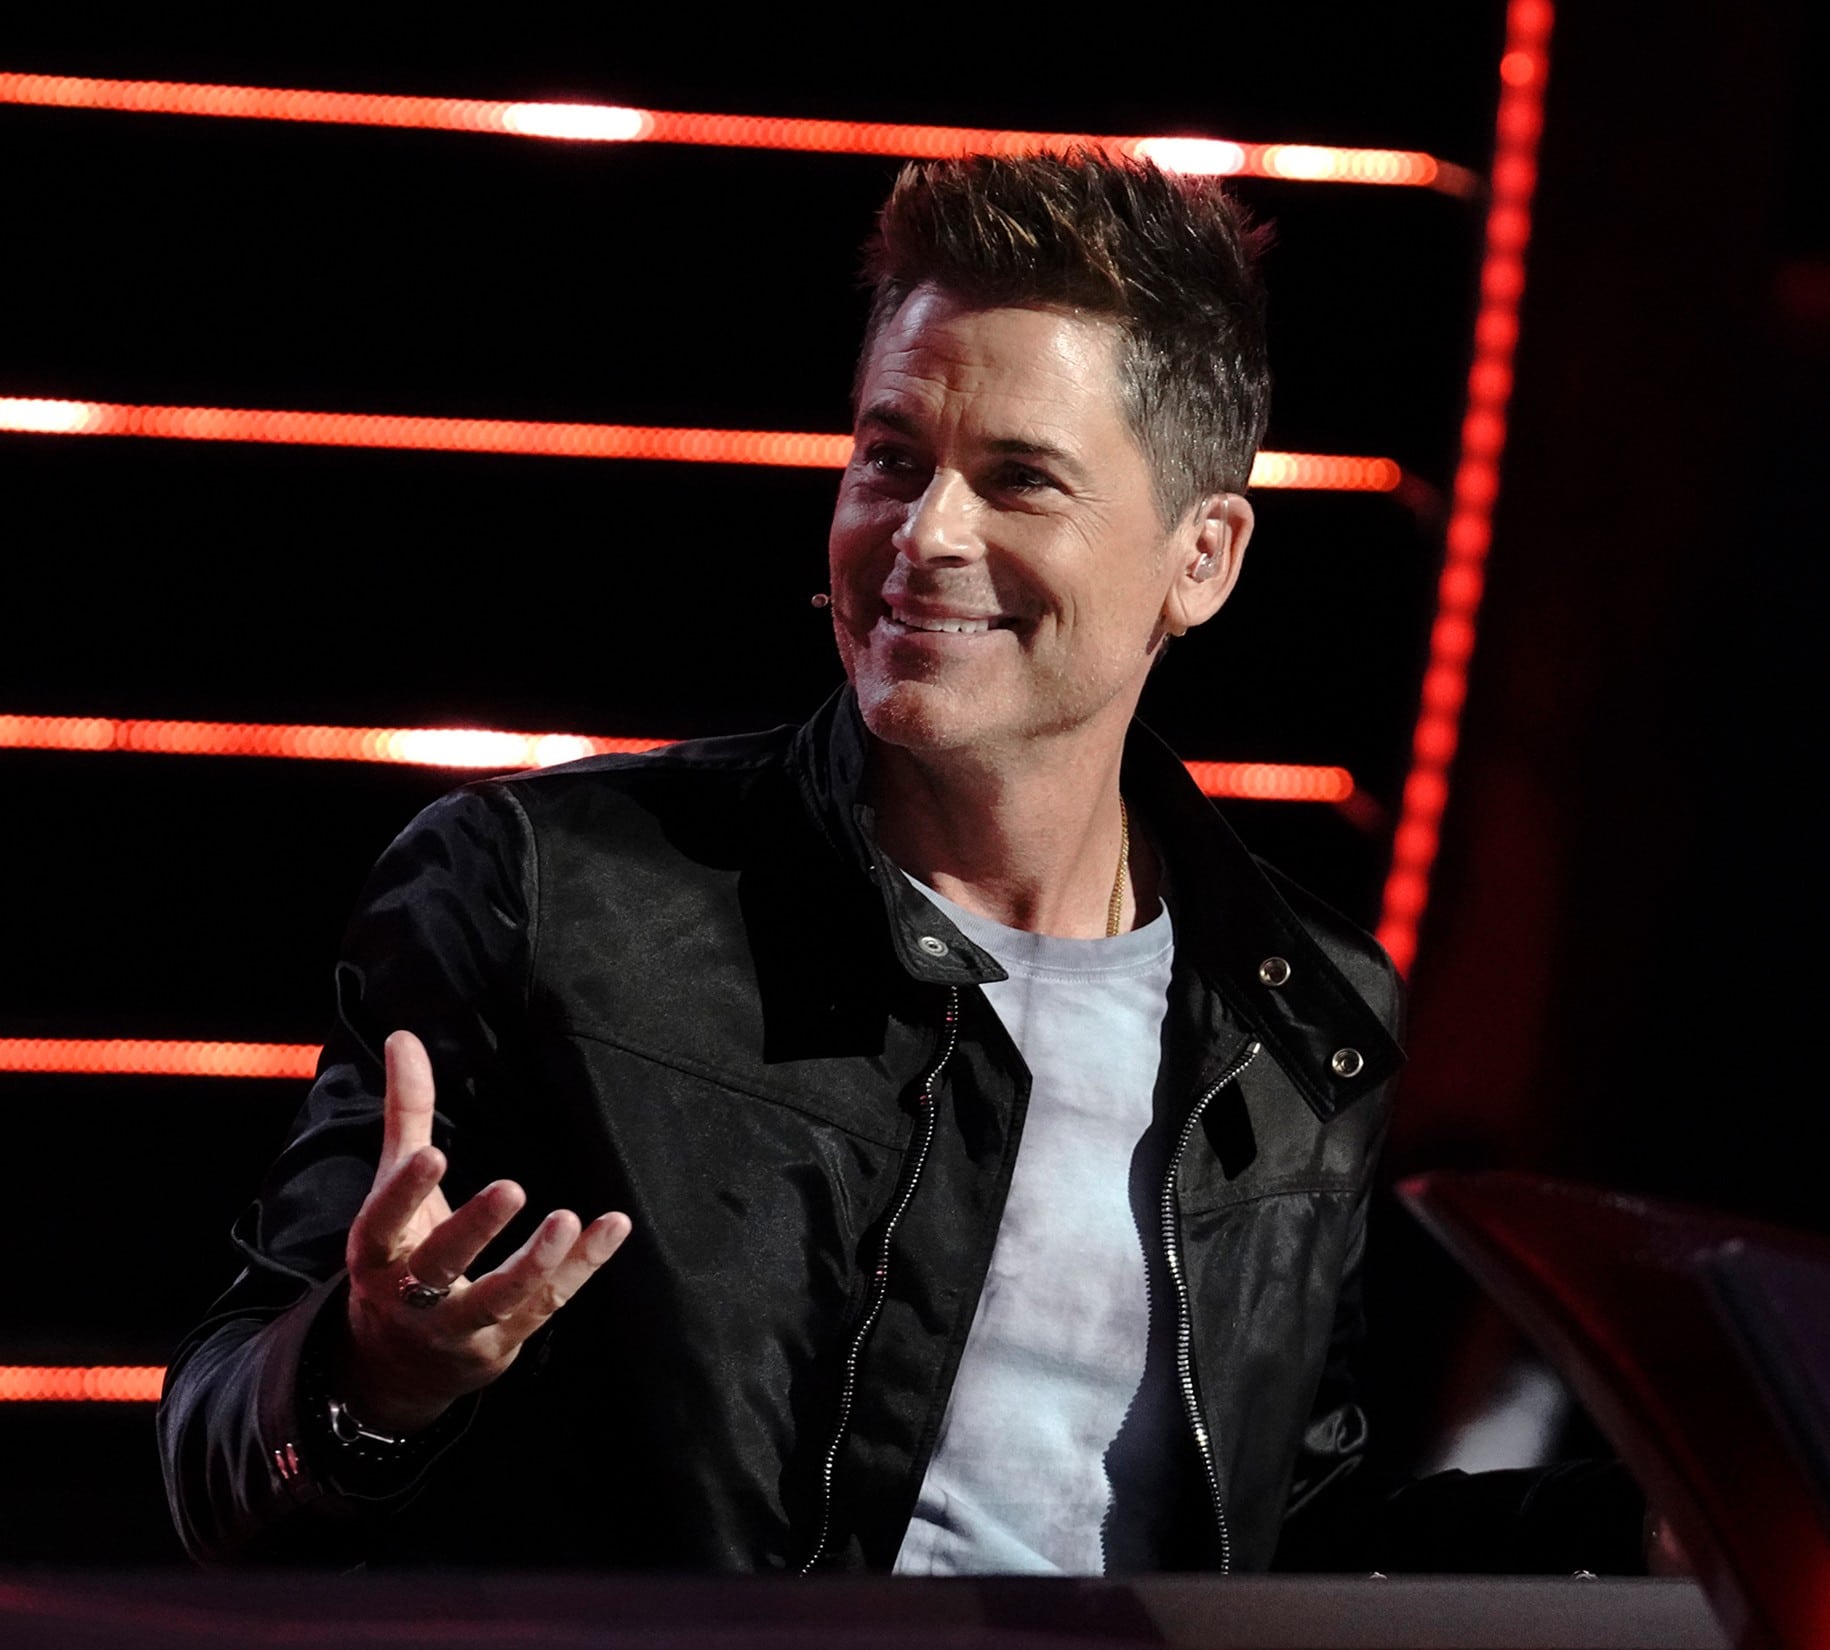 THE MASKED DANCER, guest panelist Rob Lowe Group A Playoffs - So You Think You Can Mask?', (Season 1, ep. 104, aired Jan. 20, 2021)